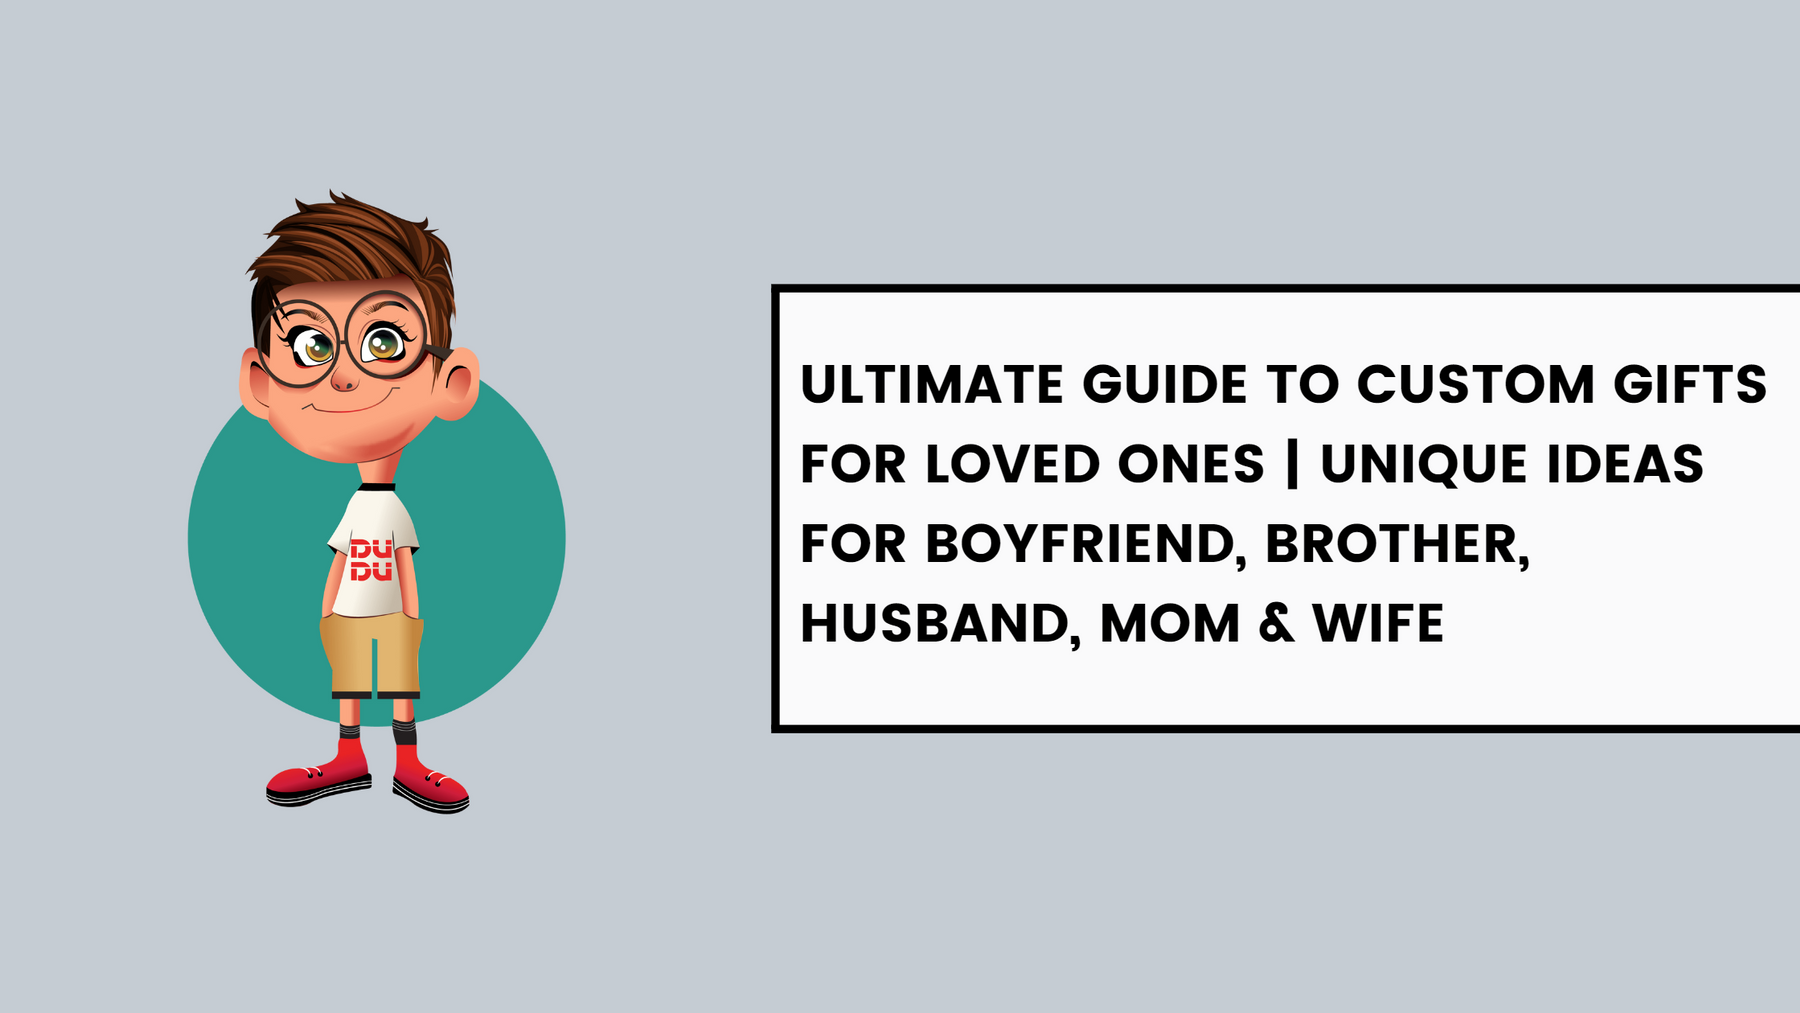 Ultimate Guide To Custom Gifts For Loved Ones - Unique Ideas For Boyfriend, Brother, Husband, Mom & Wife